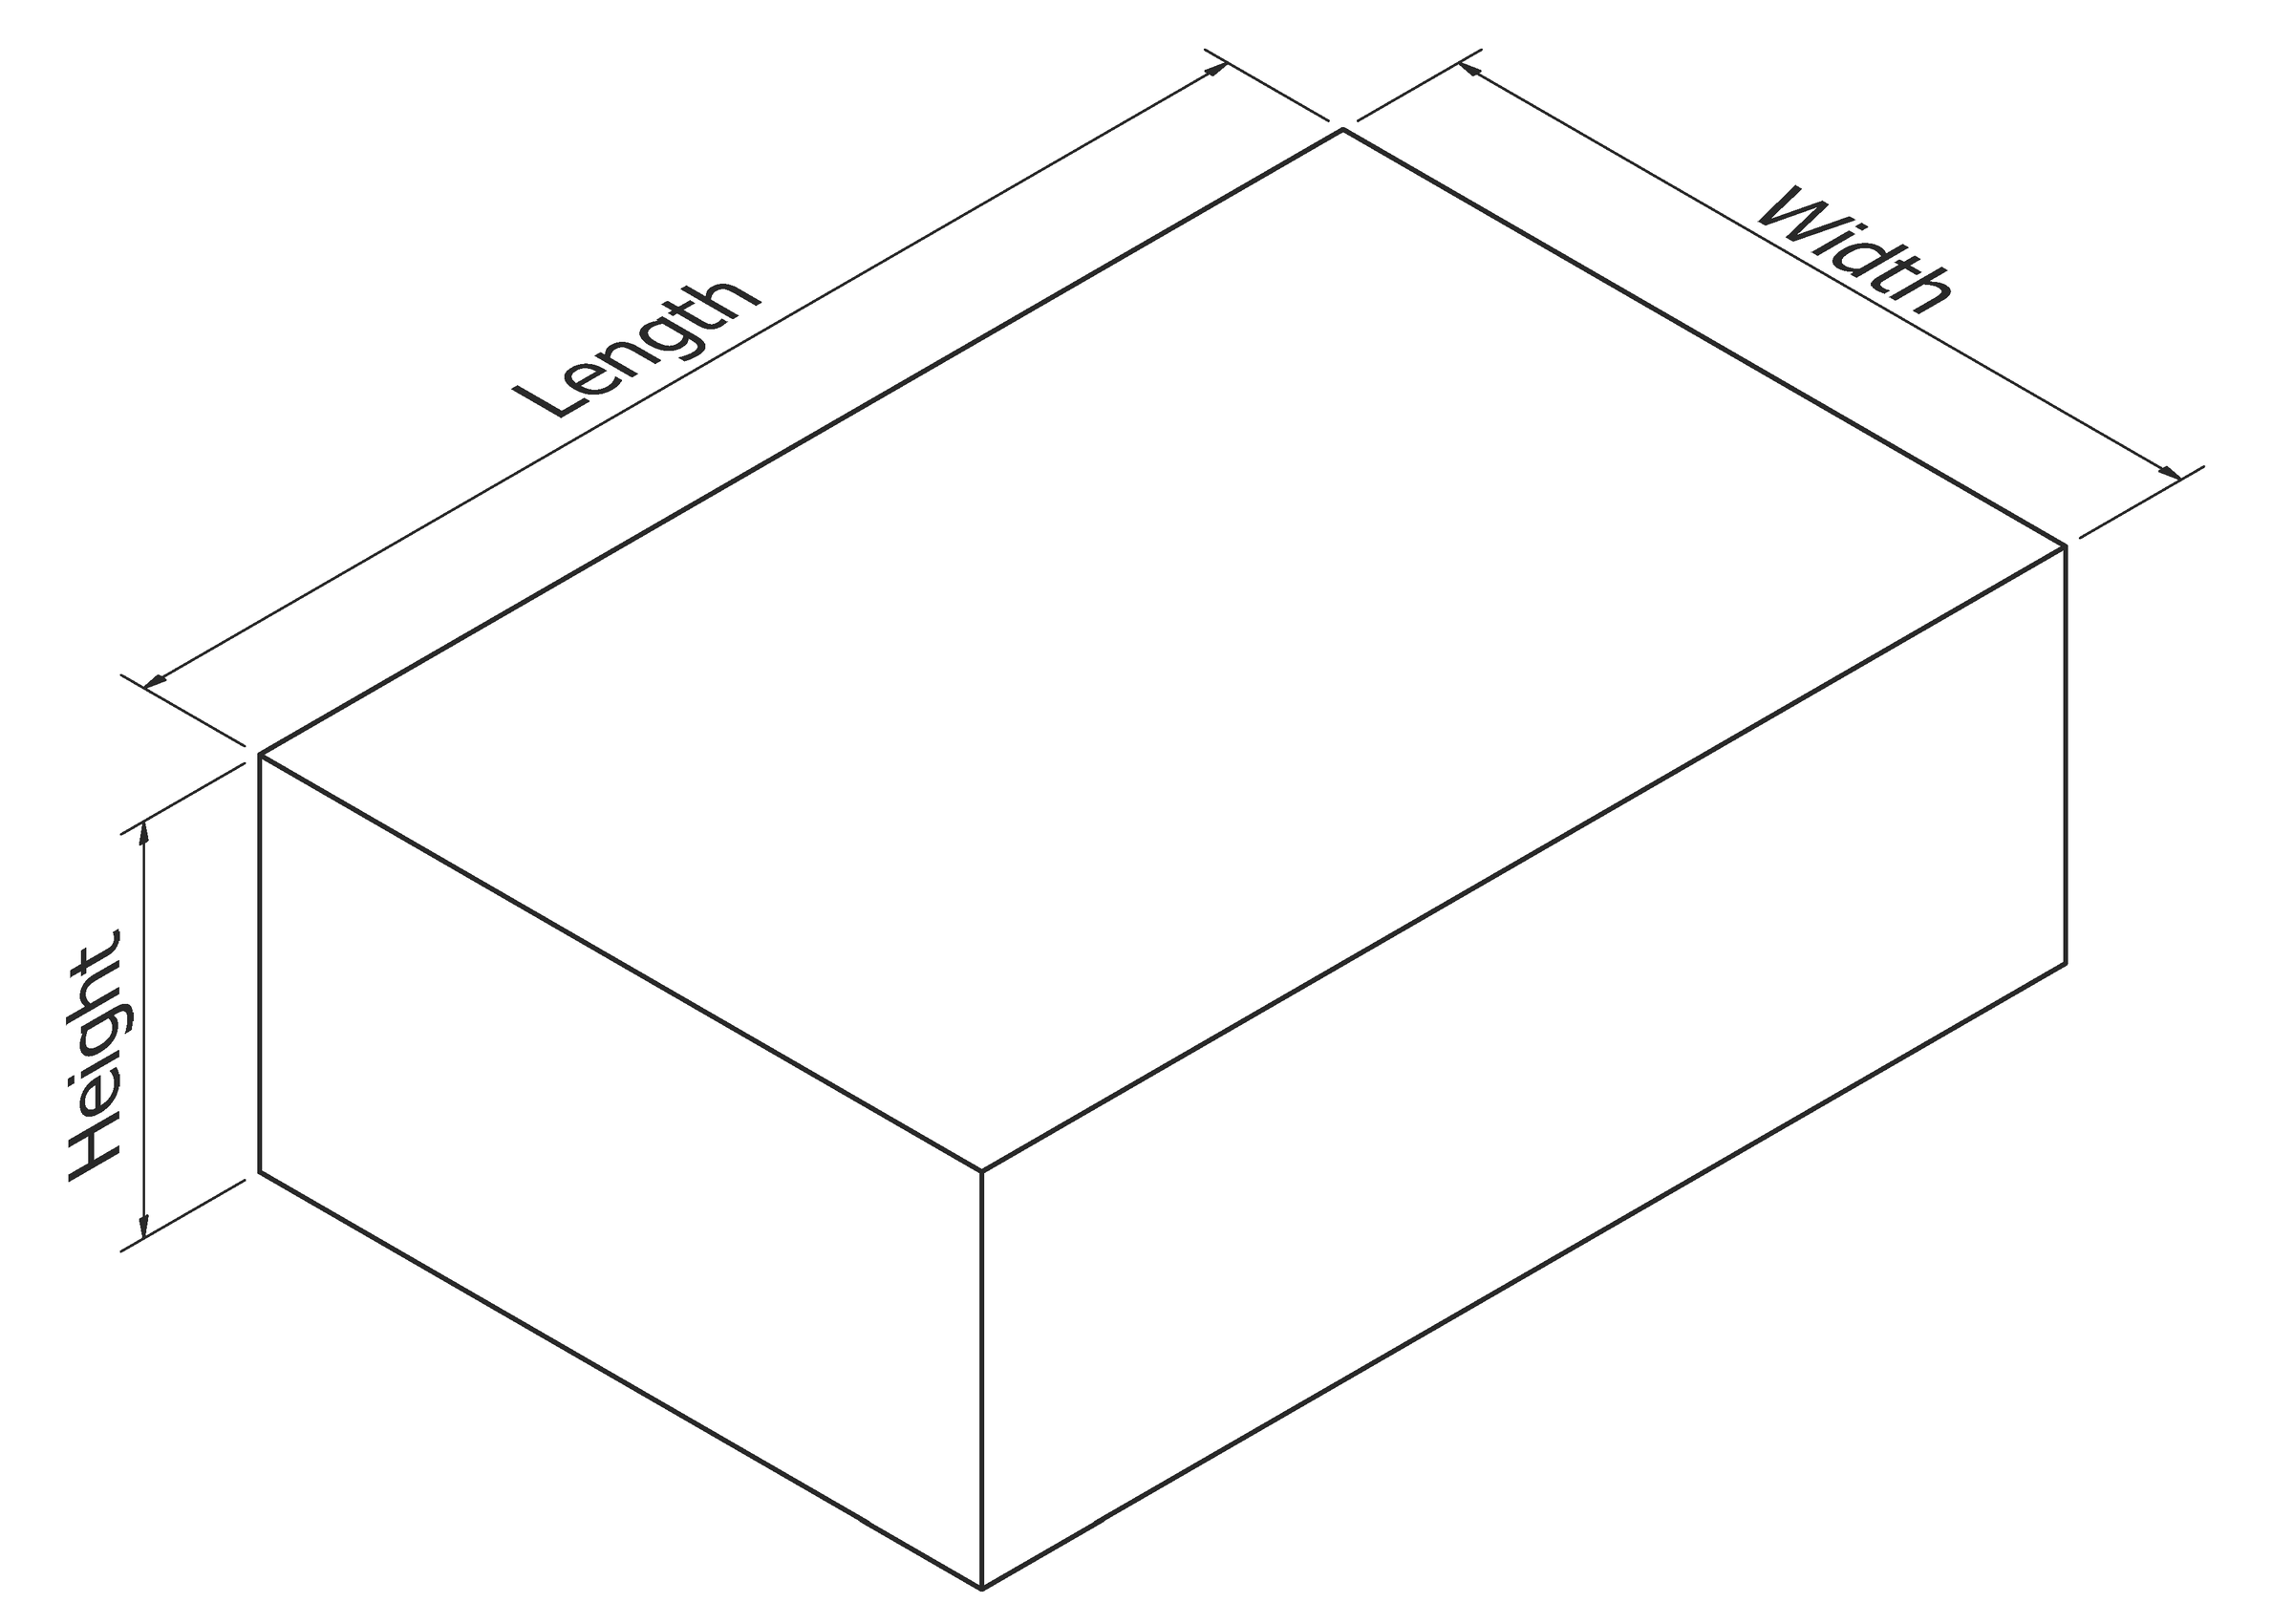 Dimensions of Plate